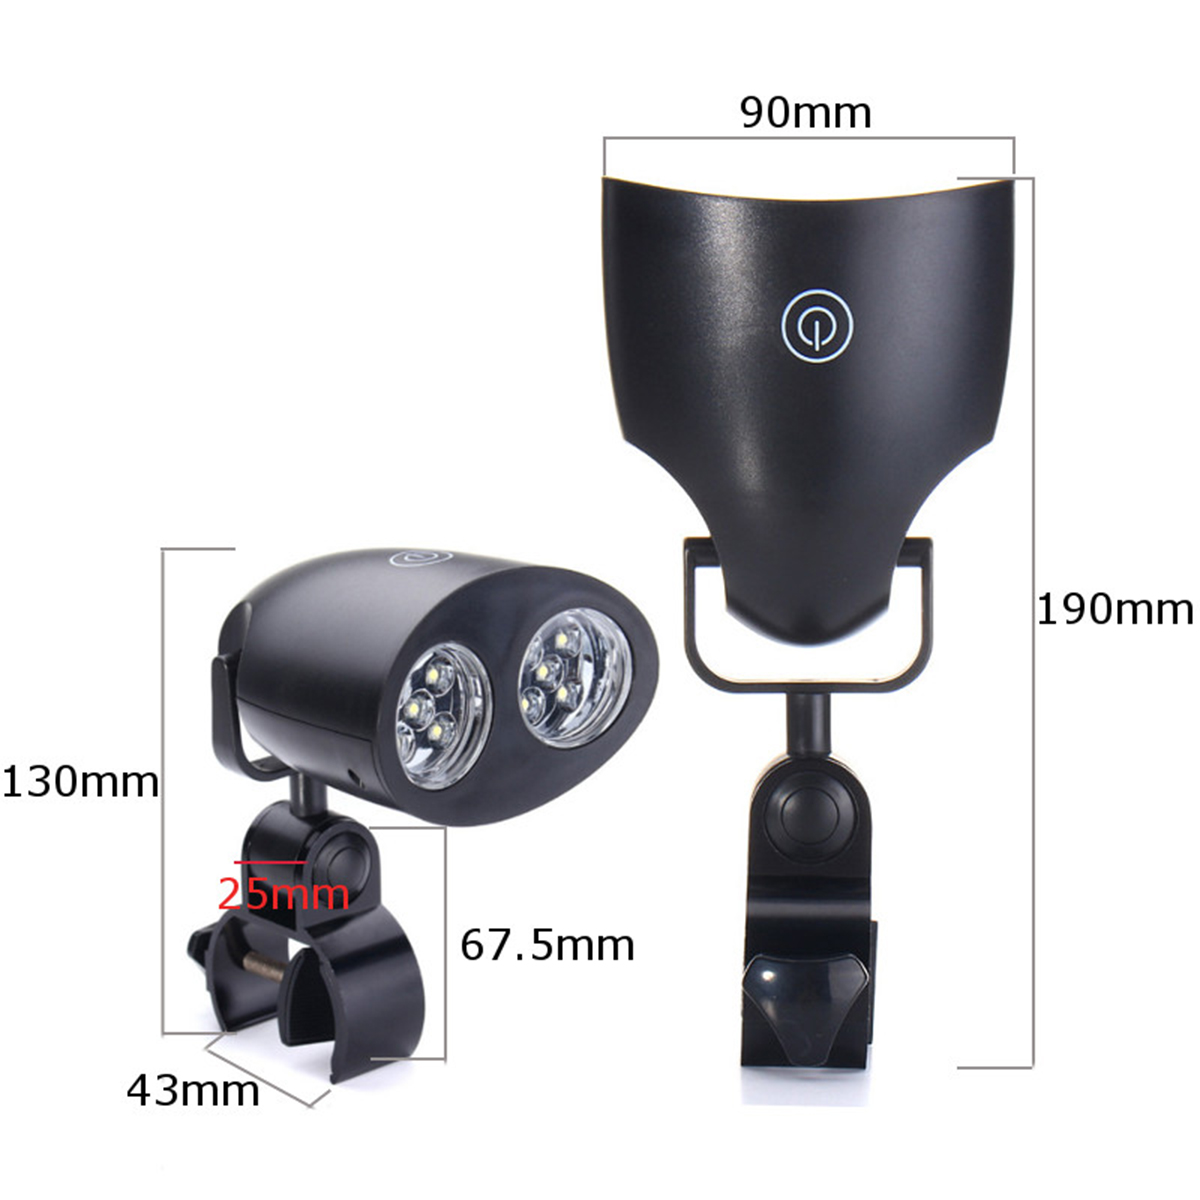 10-LED-BBQ-Grill-Barbecue-Sensor-Light-Outdoor-Waterproof-Handle-Mount-Clip-Camp-Lamp-DC-45V-1257898